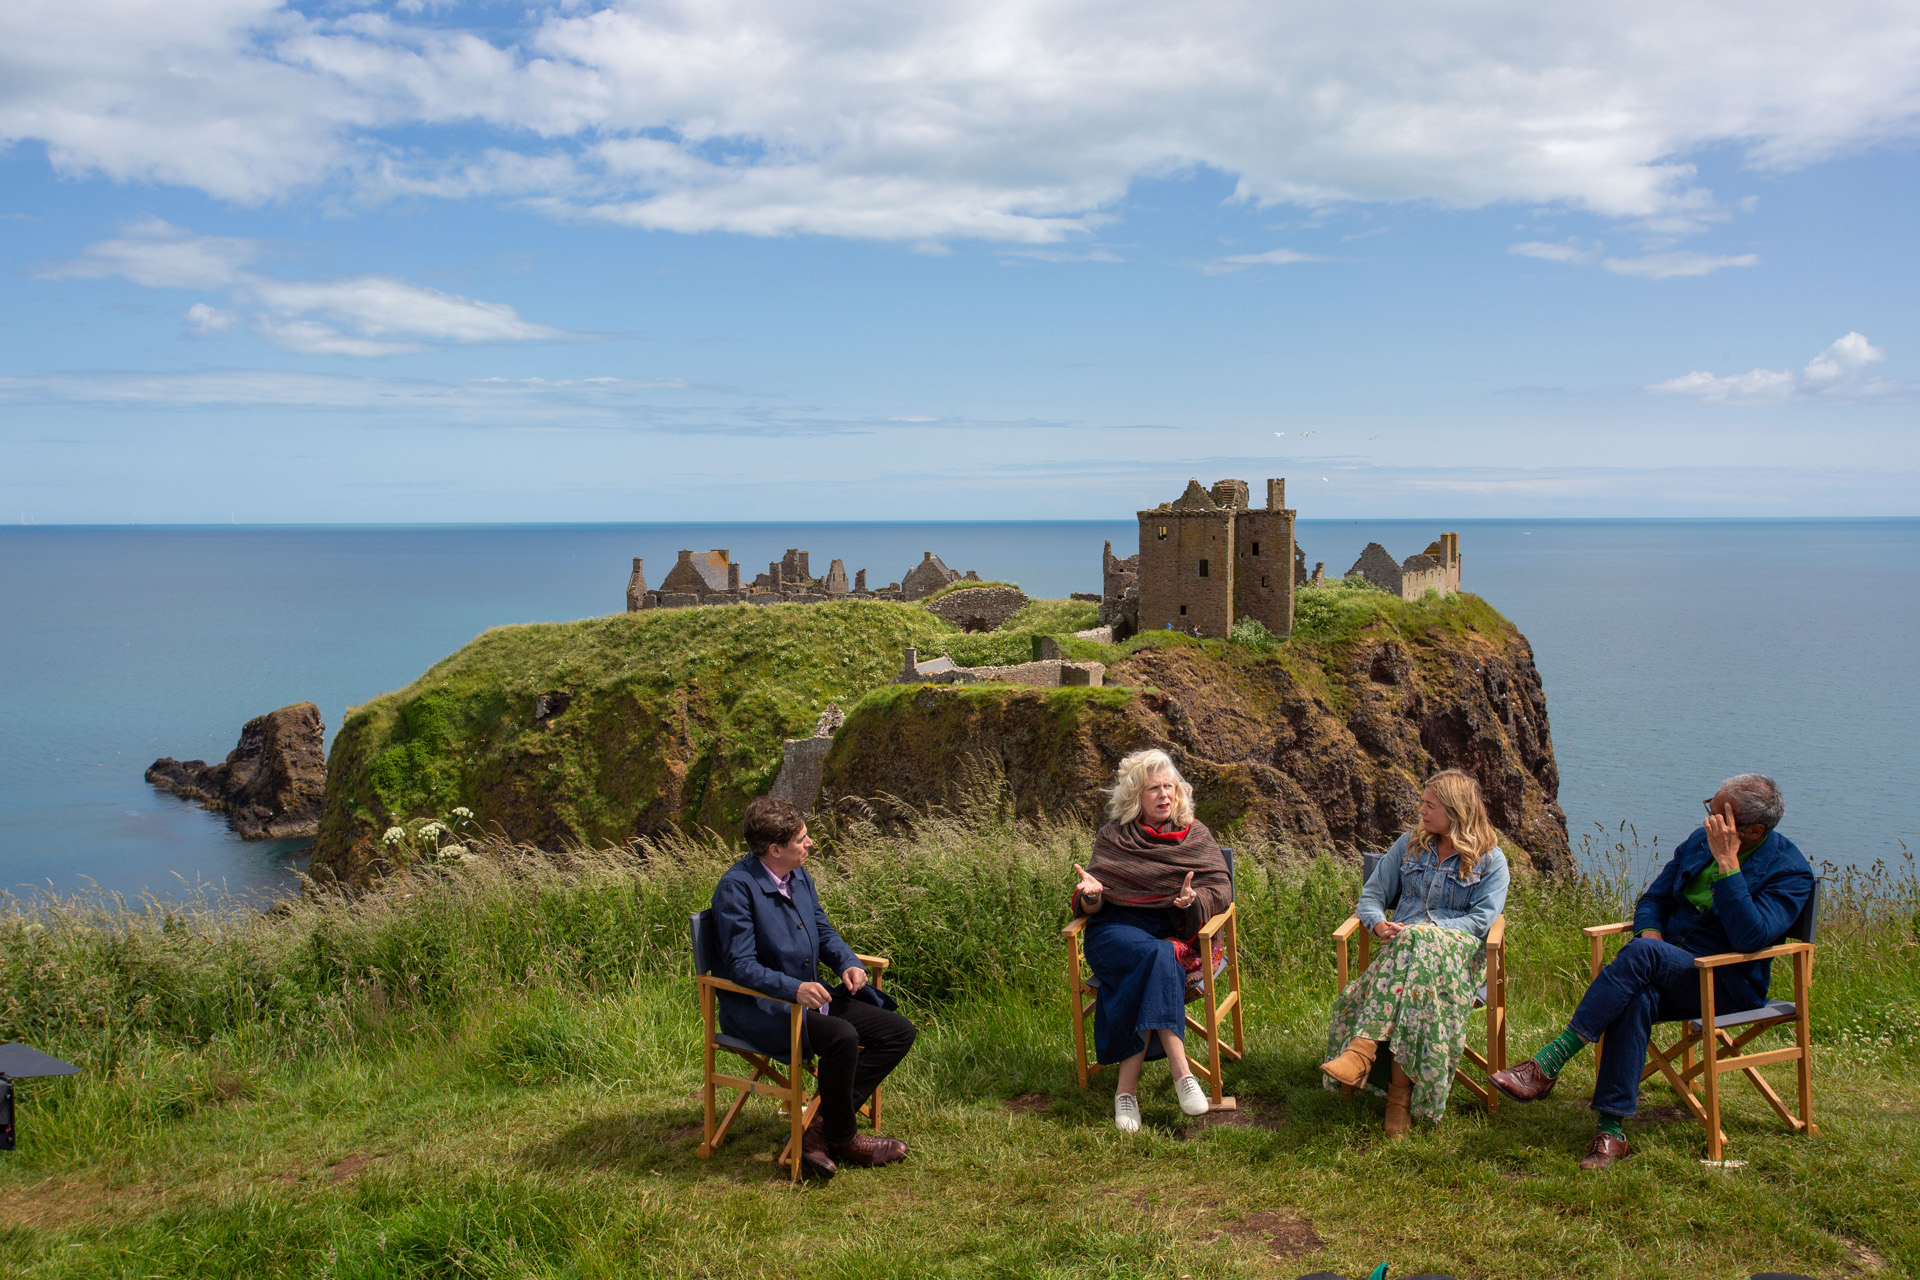 The judges sat in front of Dunnotar Castle